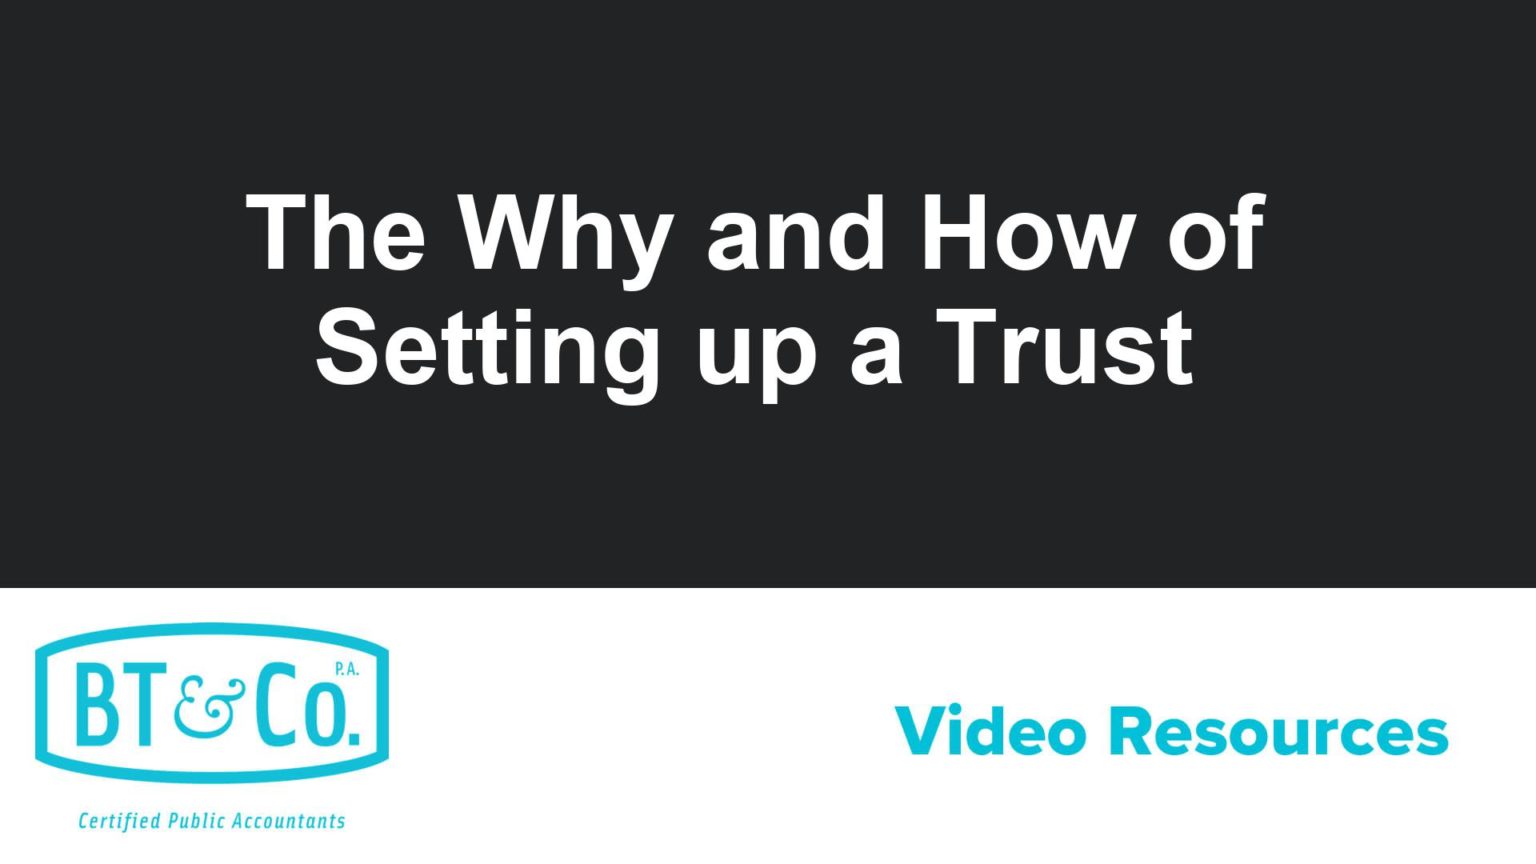 The Why and How of Setting up a Trust